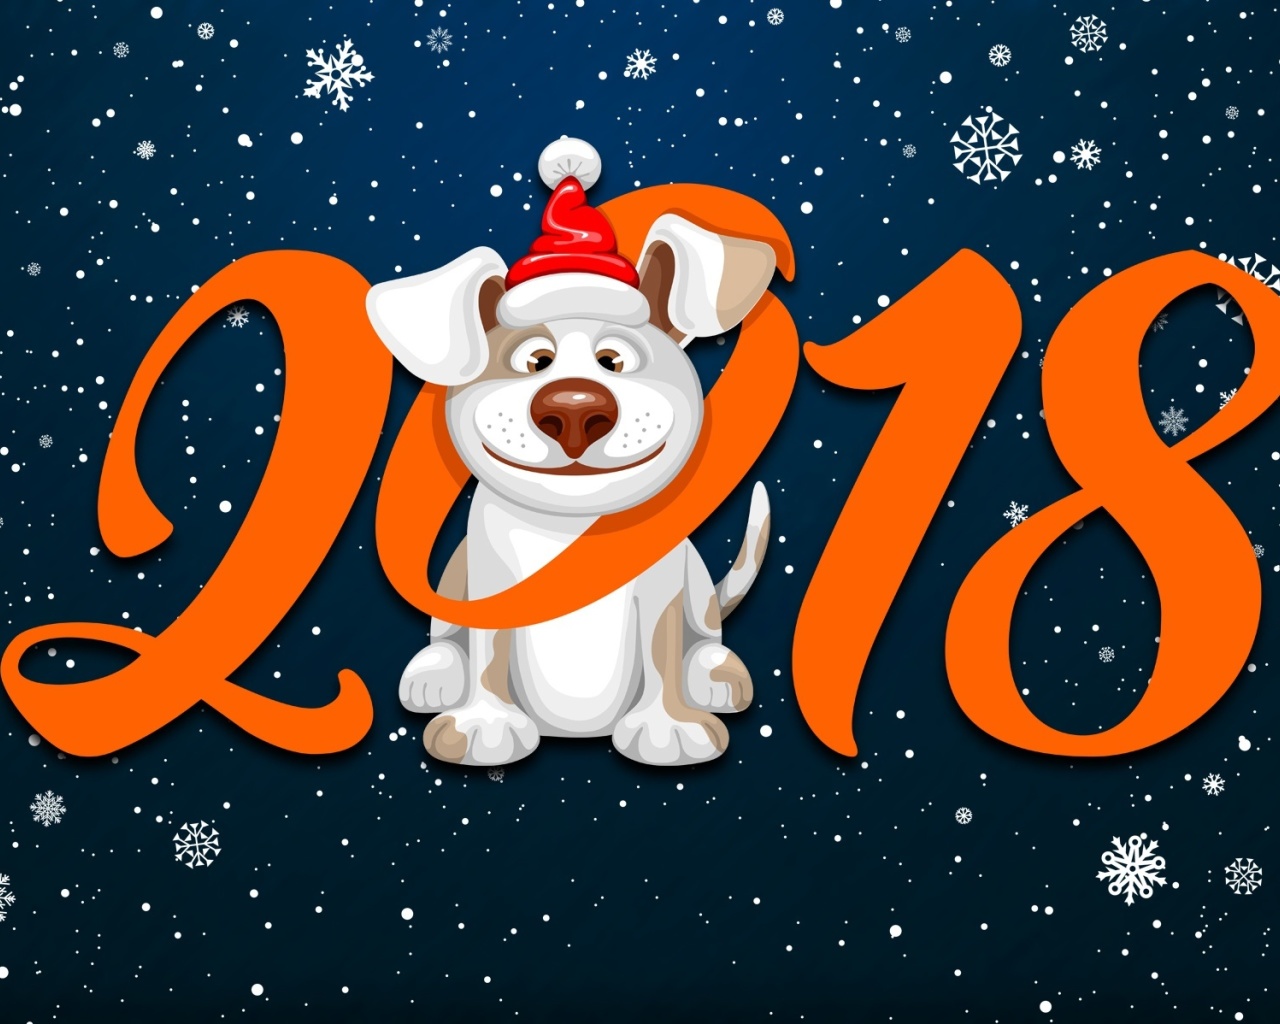 Das New Year Dog 2018 with Snow Wallpaper 1280x1024